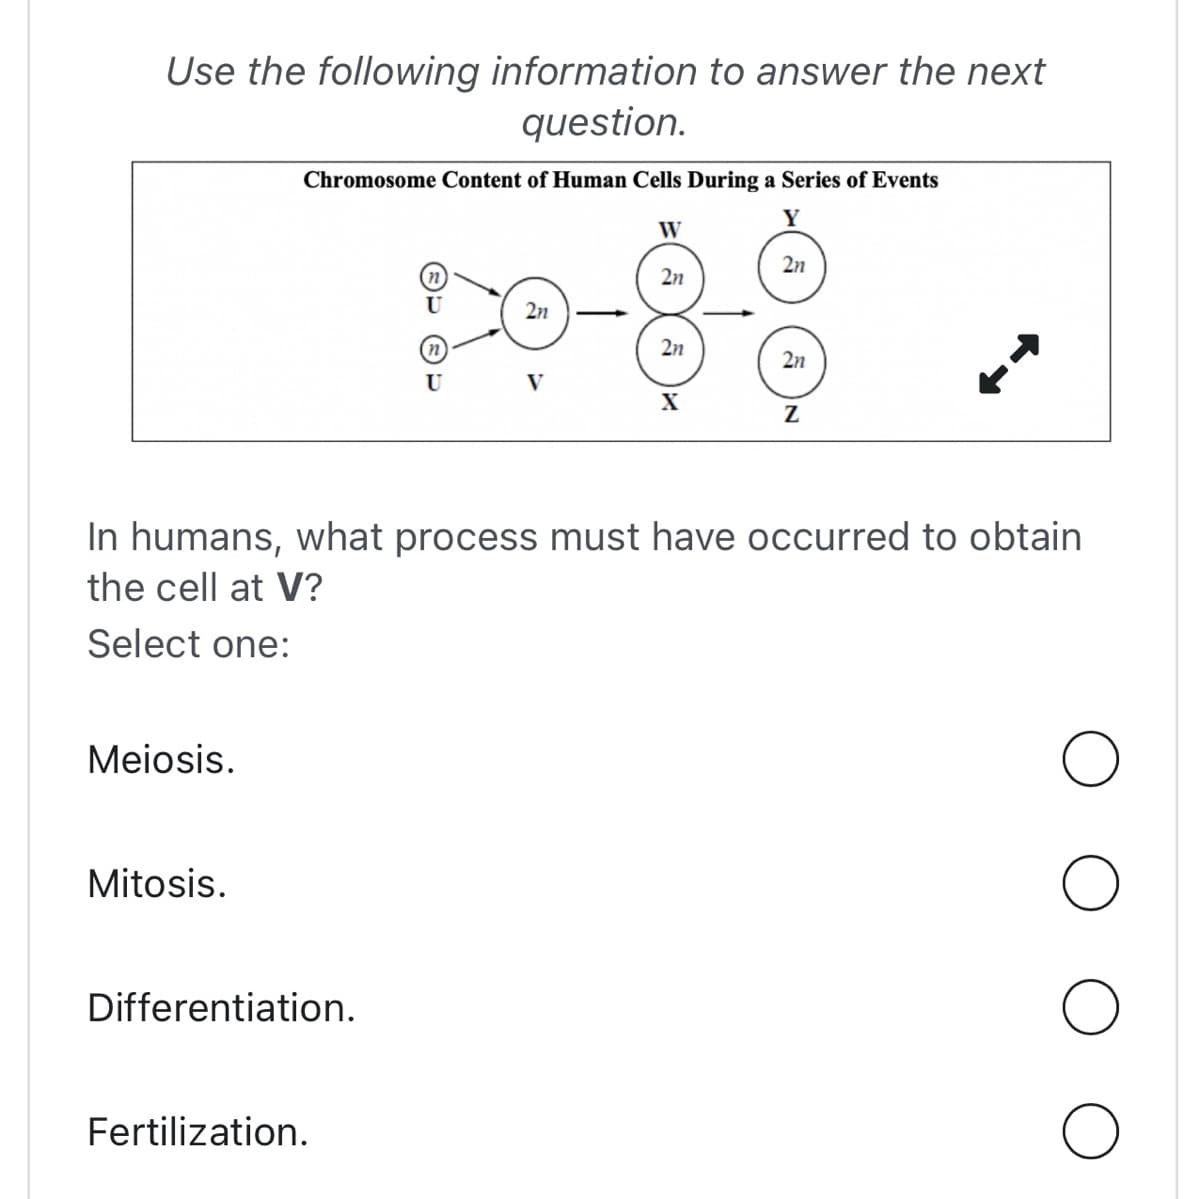 Use the following information to answer the next
question.
Meiosis.
Chromosome Content of Human Cells During a Series of Events
Y
Mitosis.
Differentiation.
(n)
U
Fertilization.
U
2n
V
W
2n
2n
X
In humans, what process must have occurred to obtain
the cell at V?
Select one:
2n
2n
Z